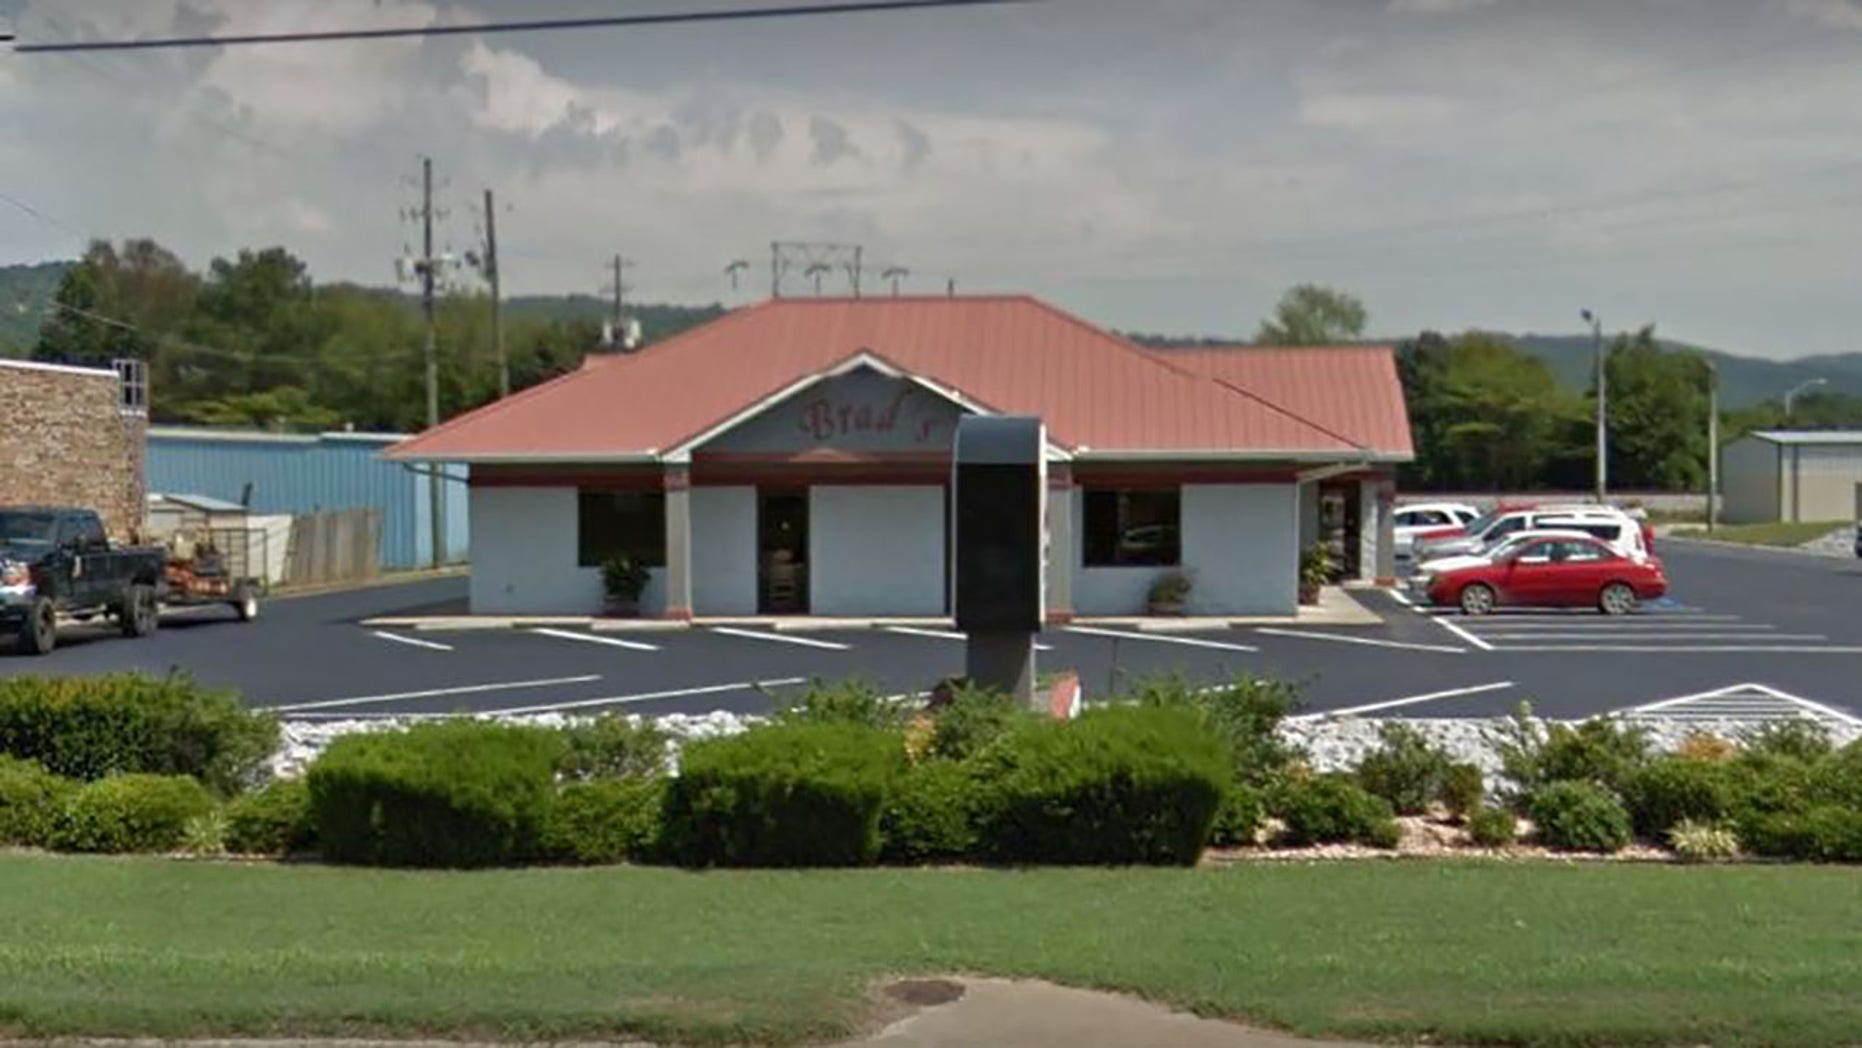 The men were dining at Brad's barbecue in Oxford, Alabama, when they met the widow.